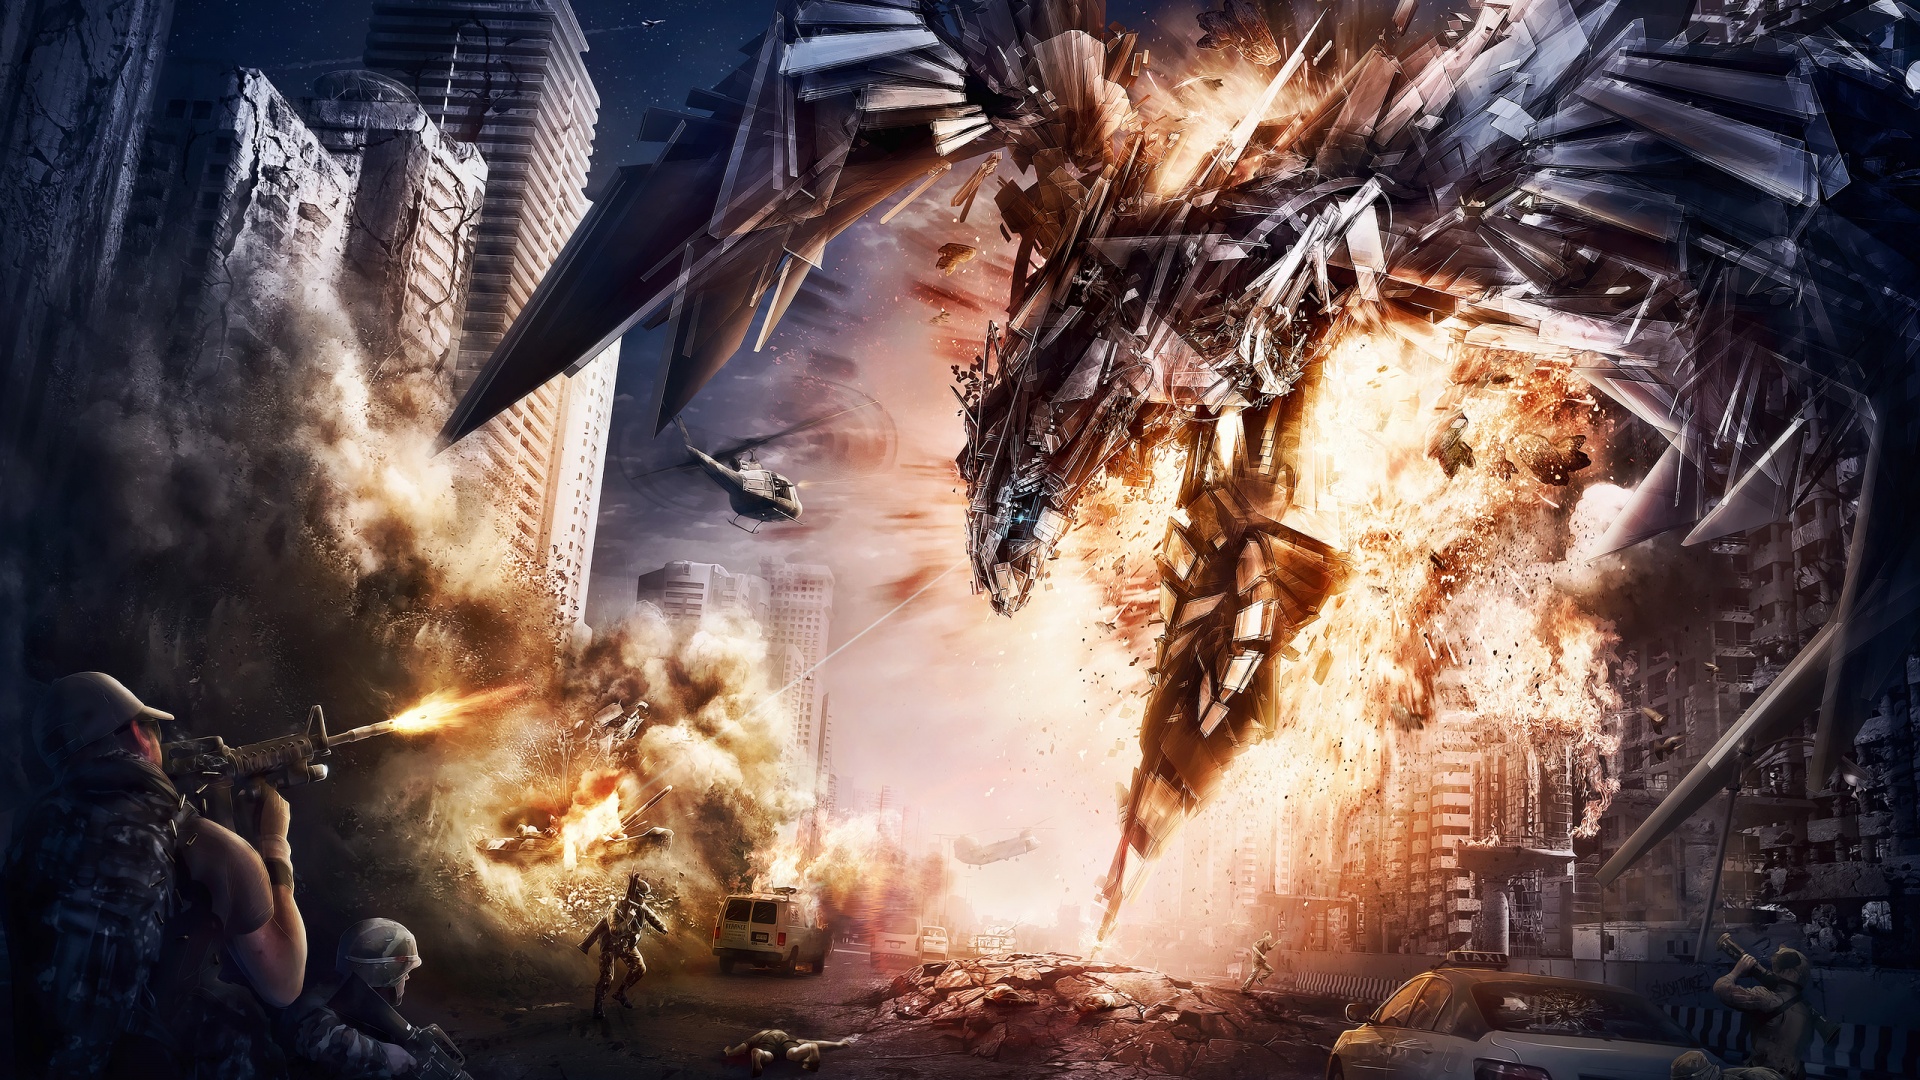 transformers age of extinction full movie free 123movies